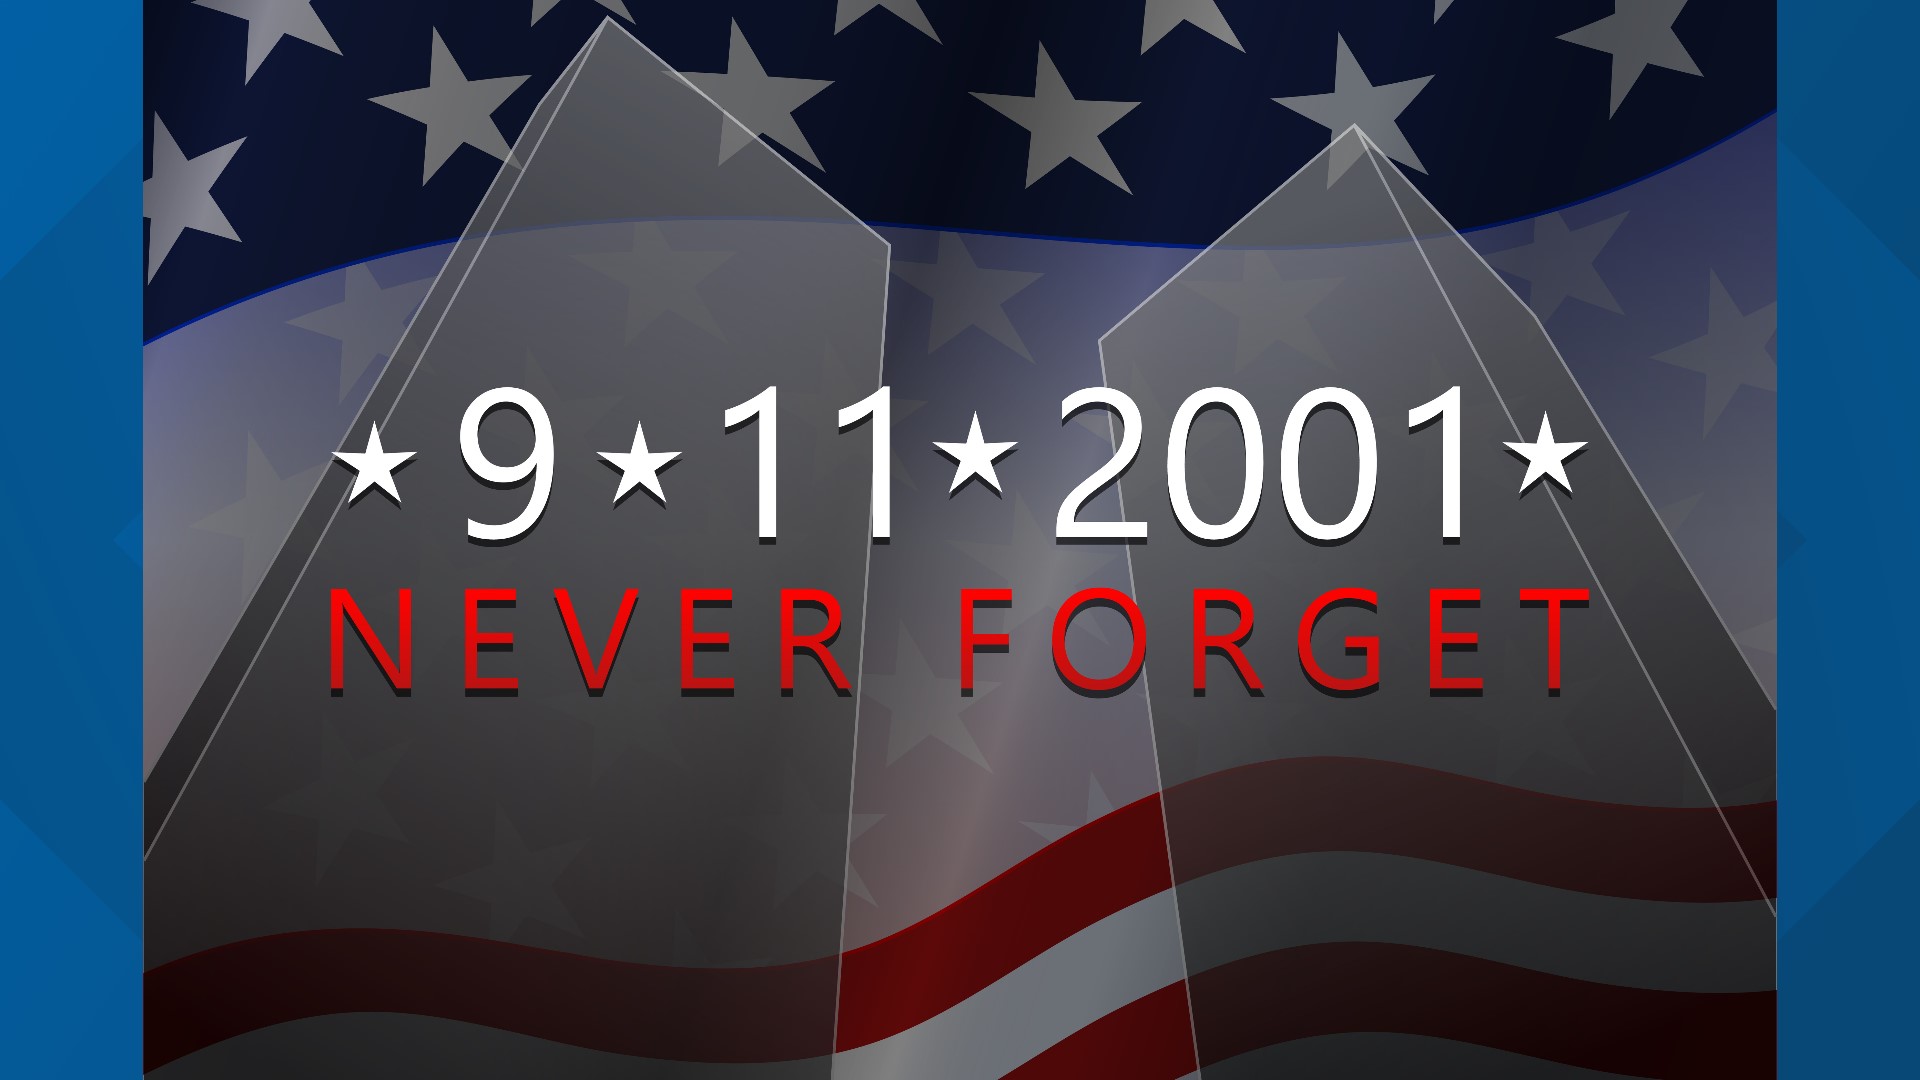 Nation Remembering Those Lost During 9 11 Attack 22 Years Ago